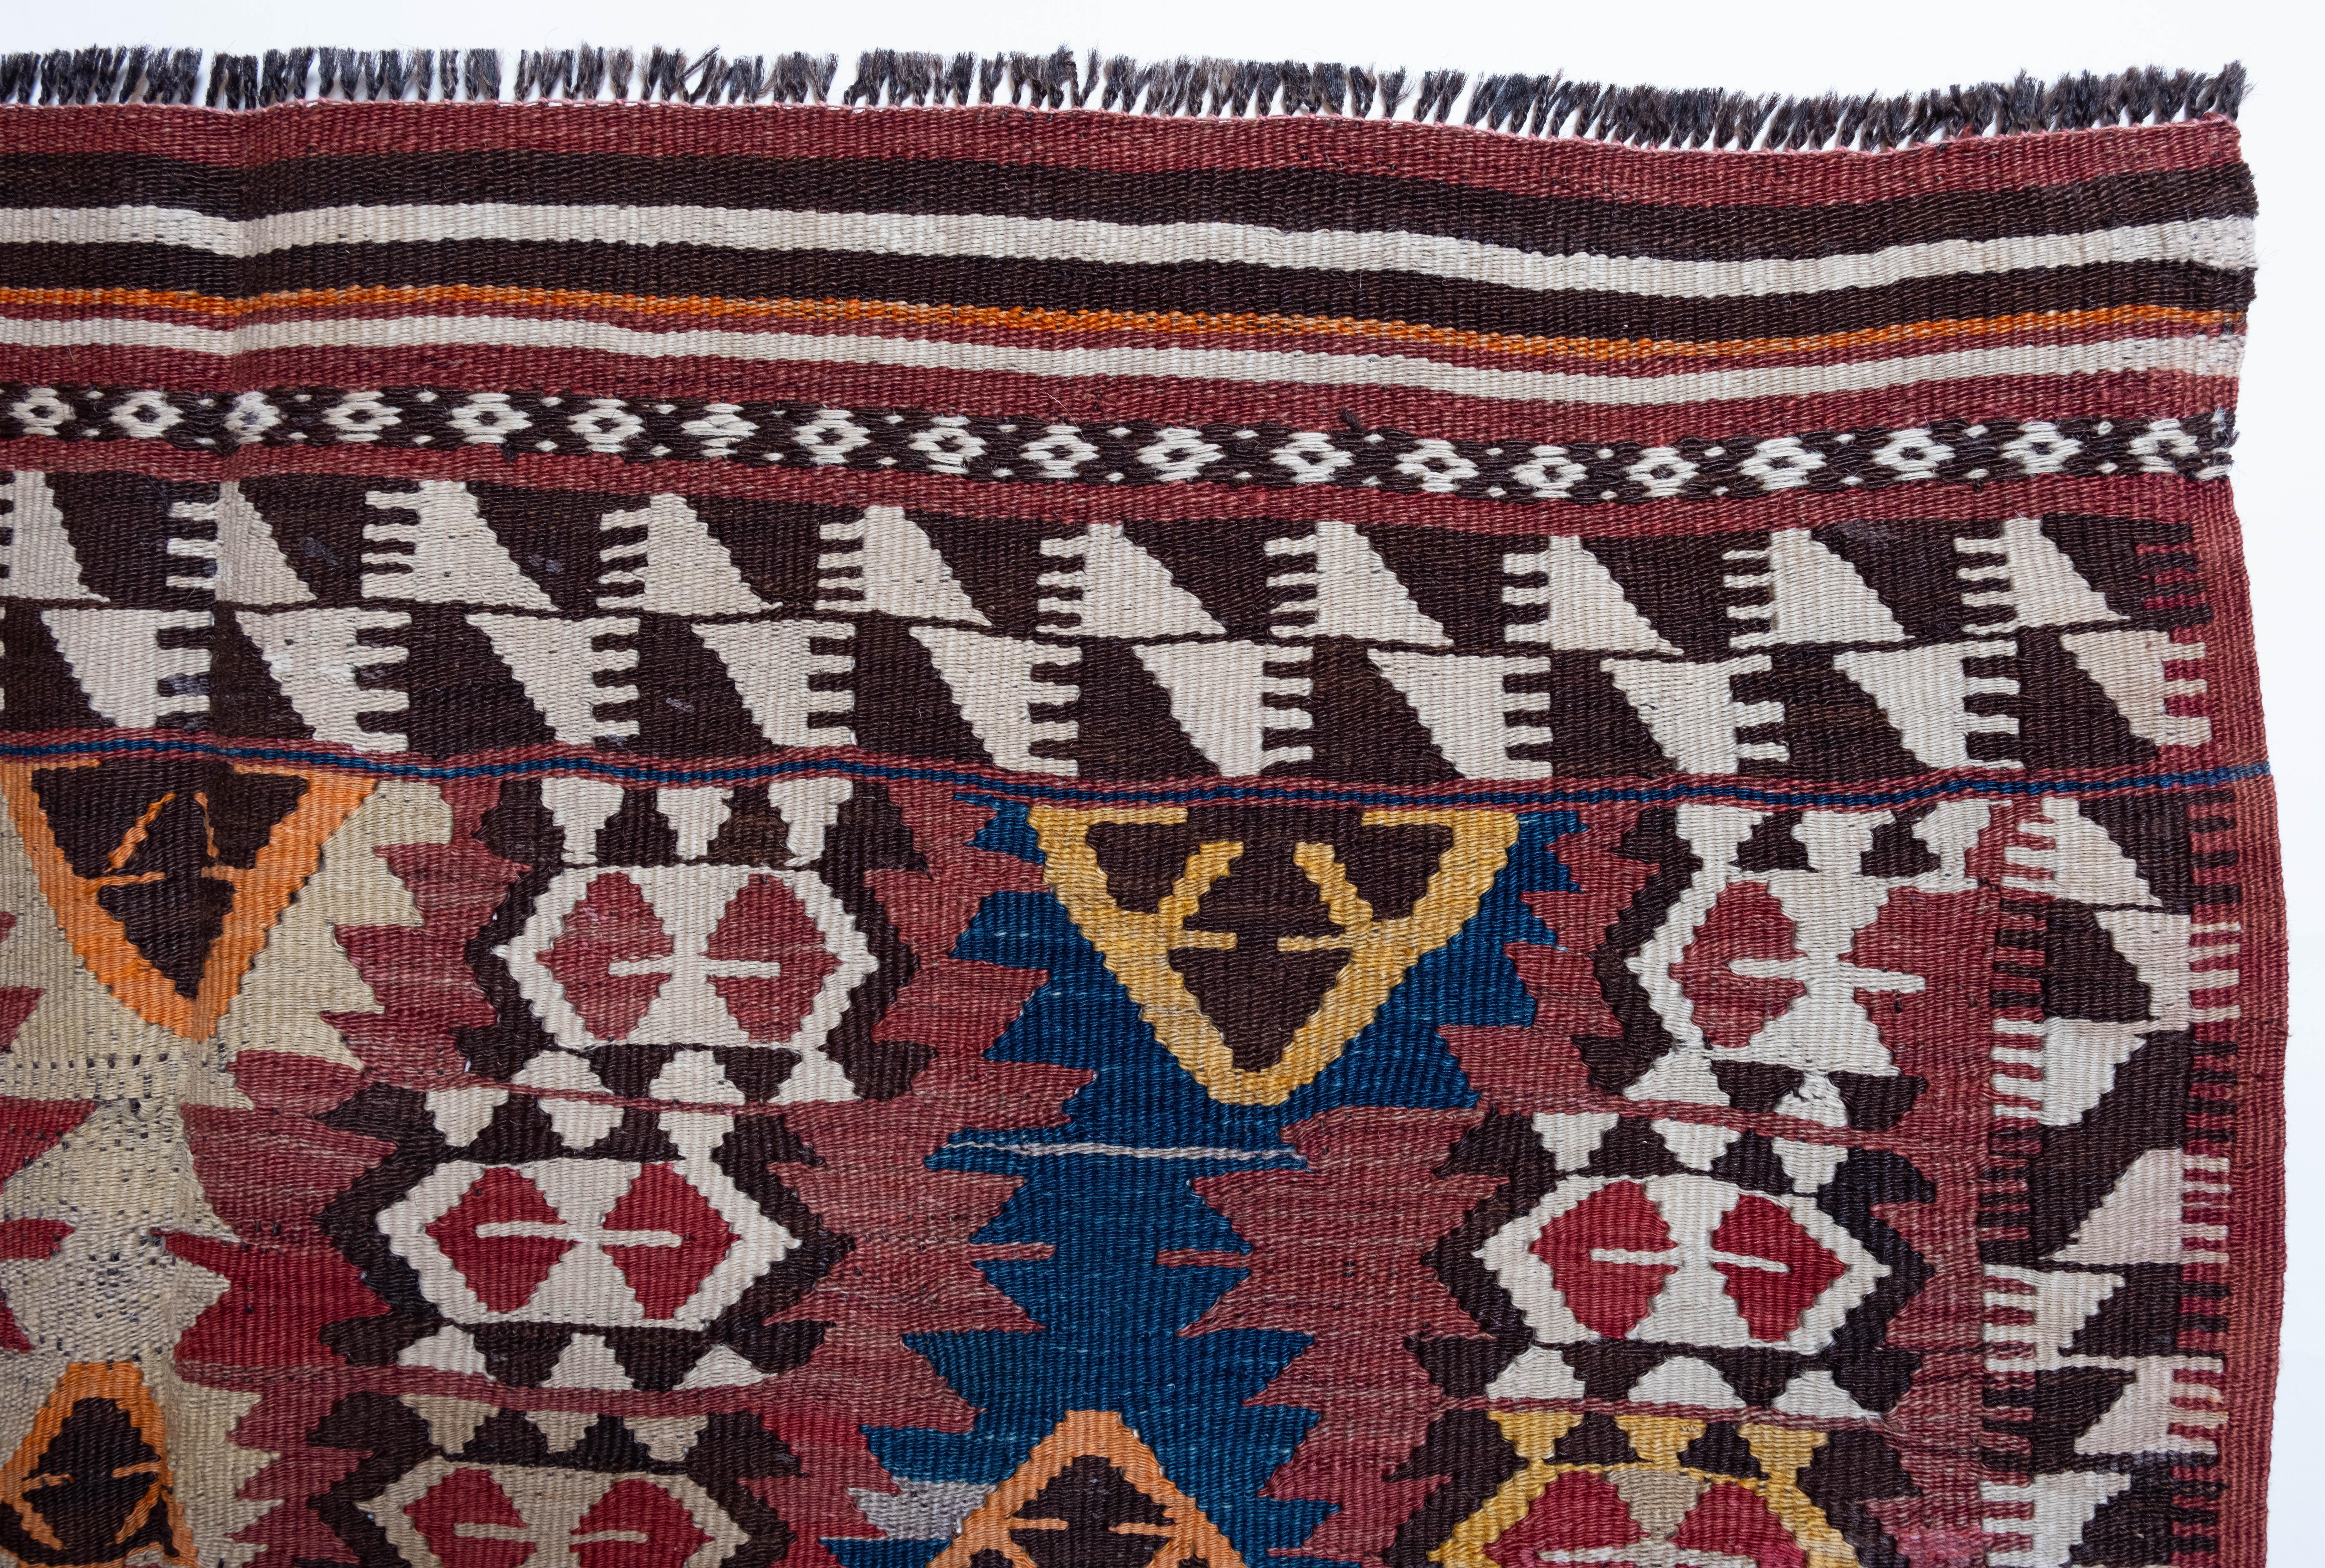 This is Eastern Anatolian Old Vintage Kilim from the Mut, Adana region with a rare and beautiful color composition. 

This highly collectible antique kilim has wonderful special colors and textures that are typical of an old kilim in good condition.